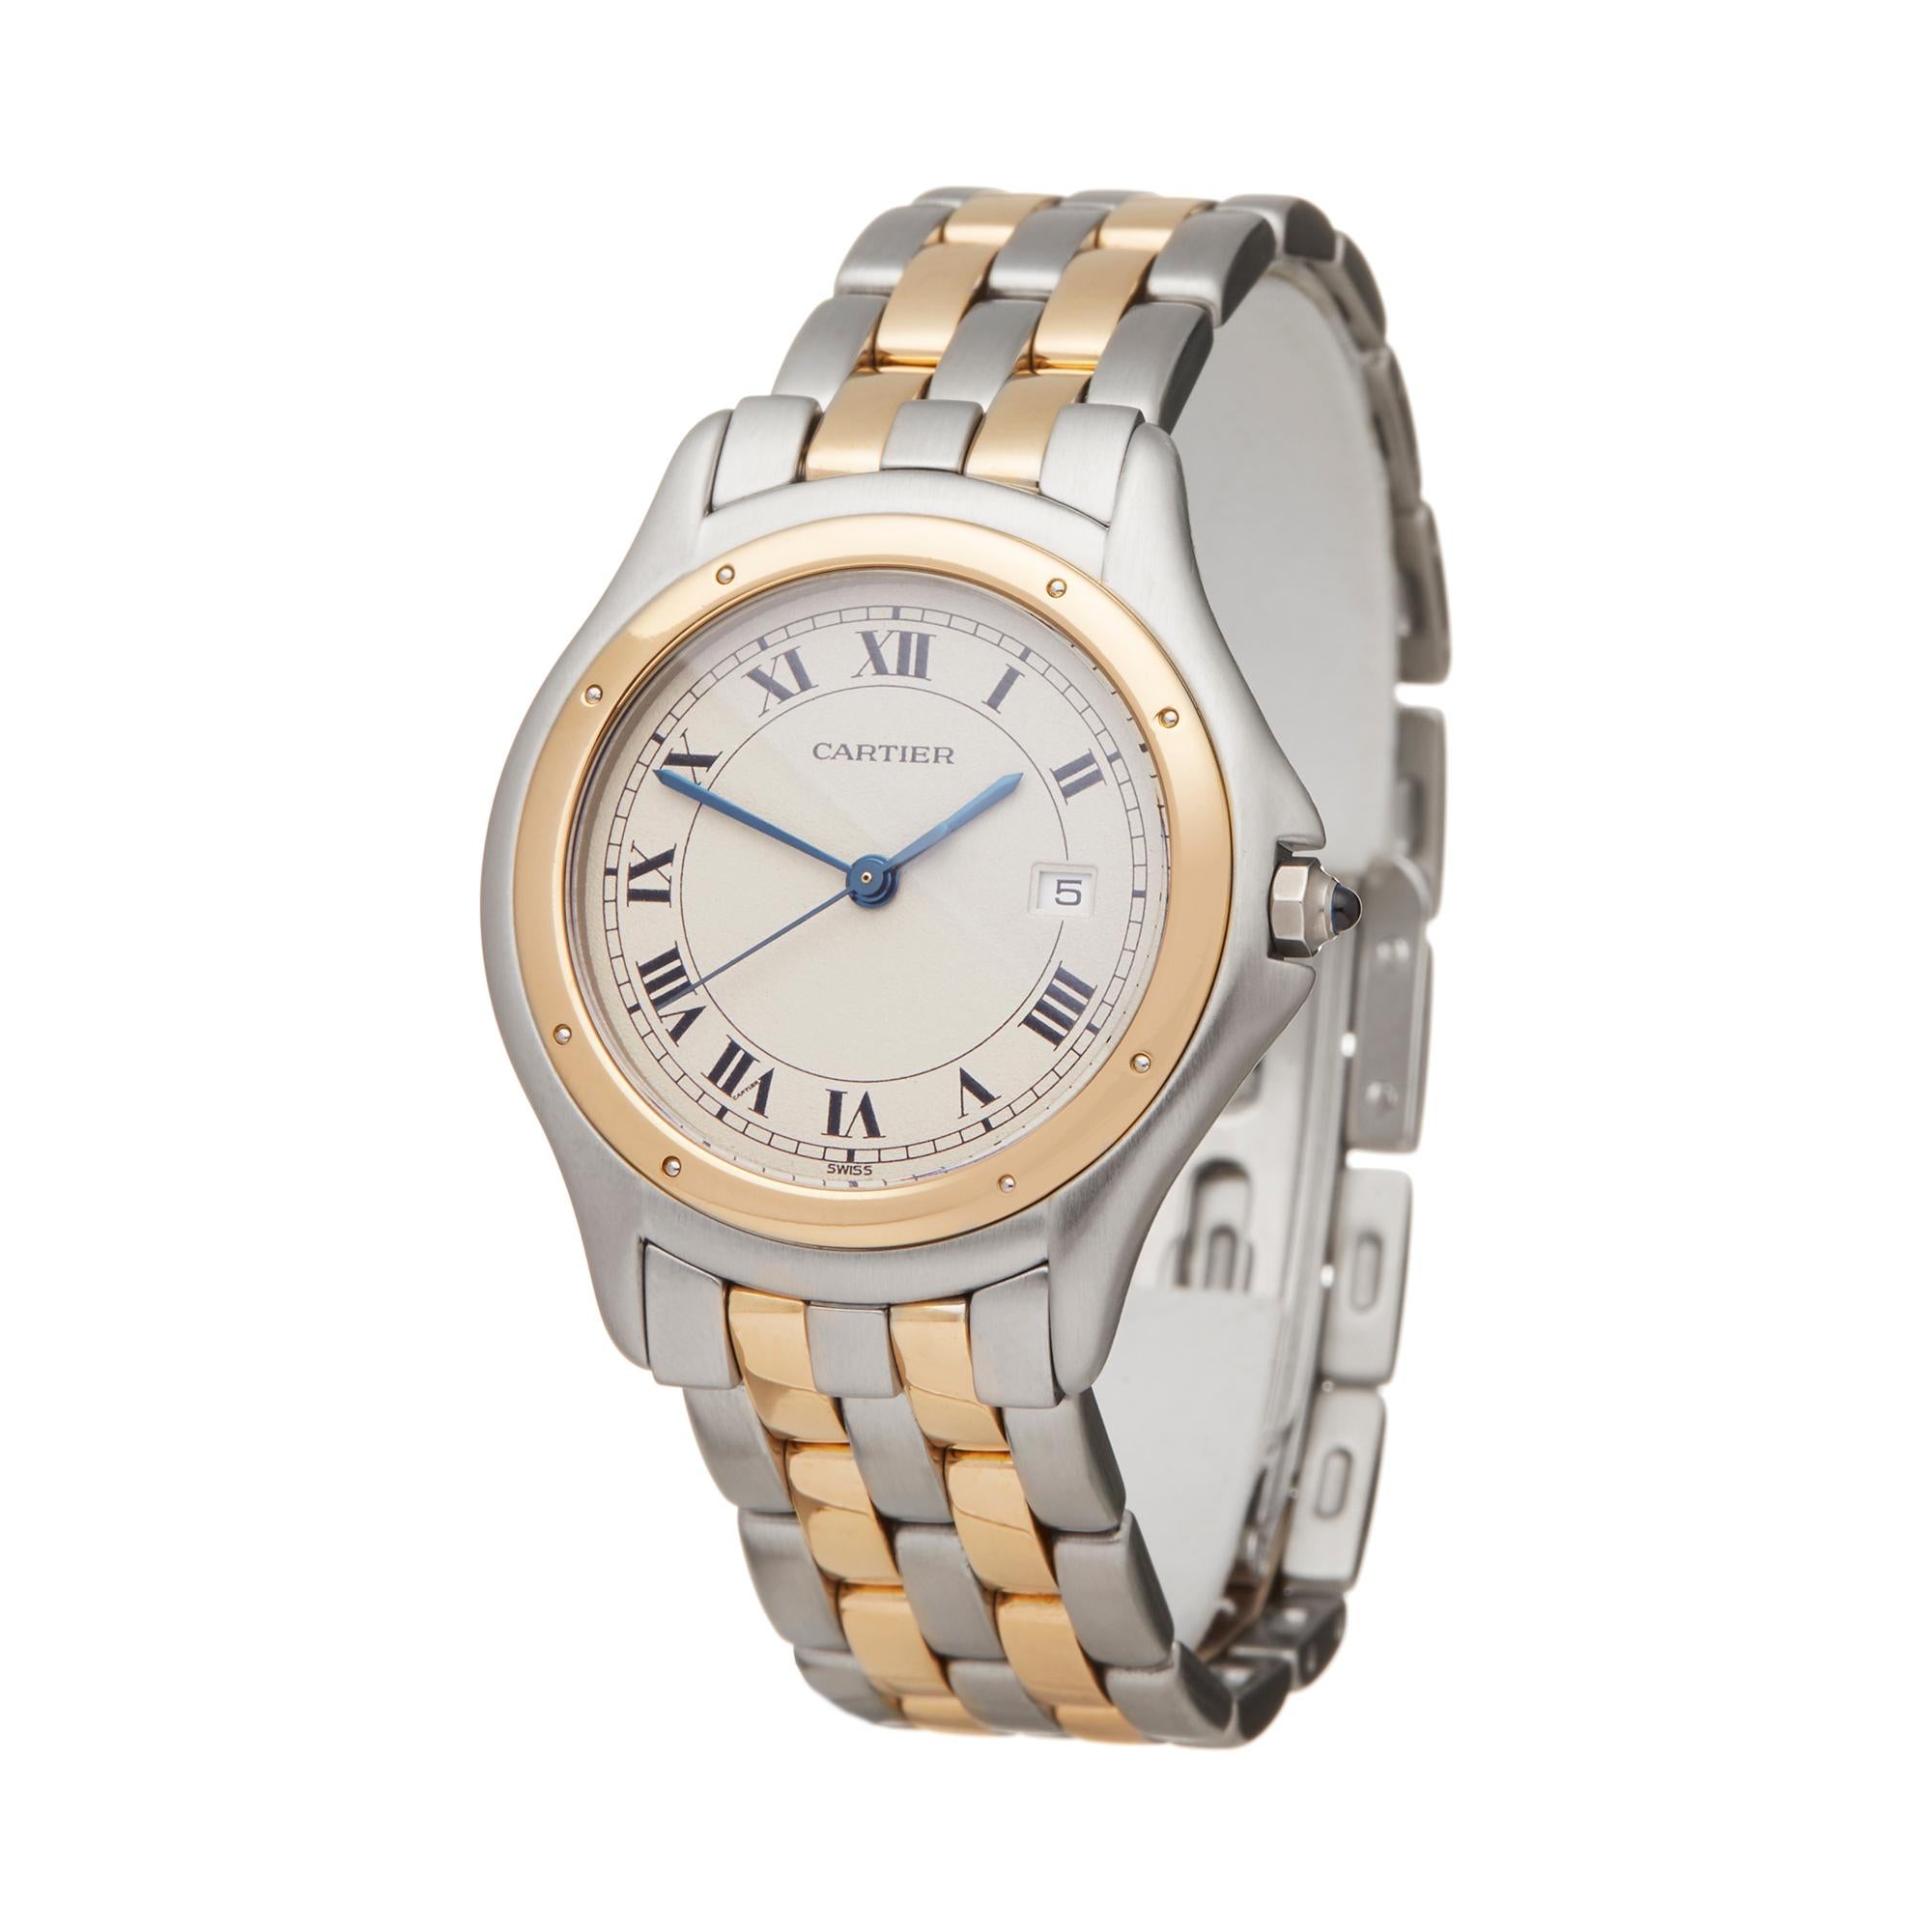 Ref: W5869
Manufacturer: Cartier
Model: Panthère
Model Ref: V74BQV
Age: Circa 1990's
Gender: Mens
Complete With: Presentation Box
Dial: White Roman 
Glass: Sapphire Crystal
Movement: Quartz
Water Resistance: To Manufacturers Specifications
Case: